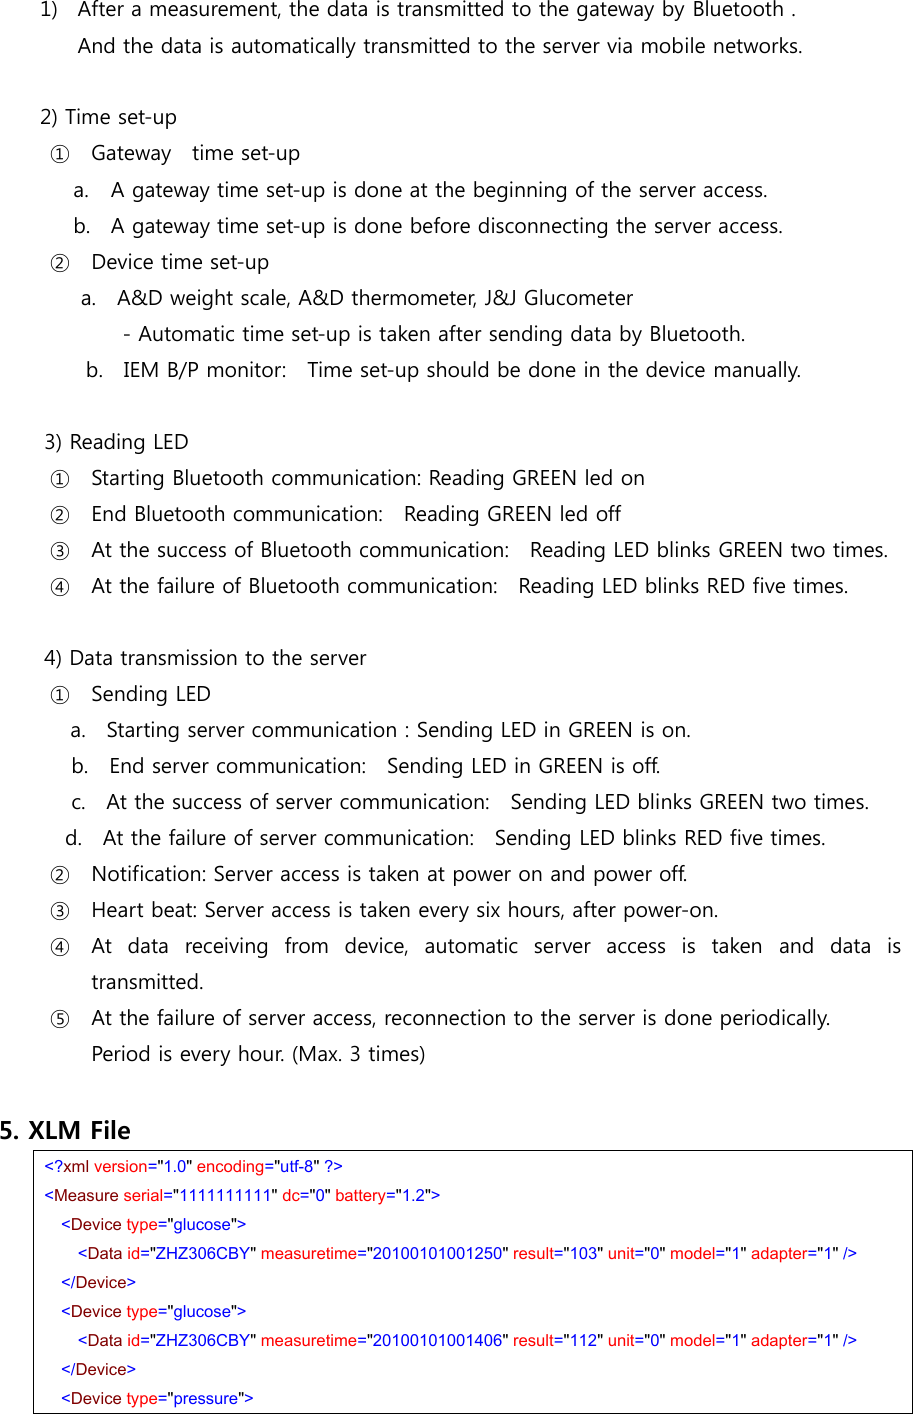 1) After a measurement, the data is transmitted to the gateway by Bluetooth .   And the data is automatically transmitted to the server via mobile networks.  2) Time set-up   ① Gateway  time set-up a. A gateway time set-up is done at the beginning of the server access. b. A gateway time set-up is done before disconnecting the server access. ② Device time set-up a.    A&amp;D weight scale, A&amp;D thermometer, J&amp;J Glucometer         - Automatic time set-up is taken after sending data by Bluetooth.               b.    IEM B/P monitor:    Time set-up should be done in the device manually.    3) Reading LED   ① Starting Bluetooth communication: Reading GREEN led on ② End Bluetooth communication:    Reading GREEN led off ③ At the success of Bluetooth communication:    Reading LED blinks GREEN two times.   ④ At the failure of Bluetooth communication:    Reading LED blinks RED five times.          4) Data transmission to the server  ① Sending LED   a.    Starting server communication : Sending LED in GREEN is on.    b.  End server communication:  Sending LED in GREEN is off.       c.    At the success of server communication:    Sending LED blinks GREEN two times.             d.  At the failure of server communication:  Sending LED blinks RED five times. ② Notification: Server access is taken at power on and power off. ③ Heart beat: Server access is taken every six hours, after power-on.   ④ At  data  receiving  from  device,  automatic  server  access  is  taken and data is transmitted.   ⑤ At the failure of server access, reconnection to the server is done periodically.   Period is every hour. (Max. 3 times)  5. XLM File  &lt;?xml version=&quot;1.0&quot; encoding=&quot;utf-8&quot; ?&gt;   &lt;Measure serial=&quot;1111111111&quot; dc=&quot;0&quot; battery=&quot;1.2&quot;&gt;   &lt;Device type=&quot;glucose&quot;&gt; &lt;Data id=&quot;ZHZ306CBY&quot; measuretime=&quot;20100101001250&quot; result=&quot;103&quot; unit=&quot;0&quot; model=&quot;1&quot; adapter=&quot;1&quot; /&gt;     &lt;/Device&gt;   &lt;Device type=&quot;glucose&quot;&gt; &lt;Data id=&quot;ZHZ306CBY&quot; measuretime=&quot;20100101001406&quot; result=&quot;112&quot; unit=&quot;0&quot; model=&quot;1&quot; adapter=&quot;1&quot; /&gt;     &lt;/Device&gt;   &lt;Device type=&quot;pressure&quot;&gt; 